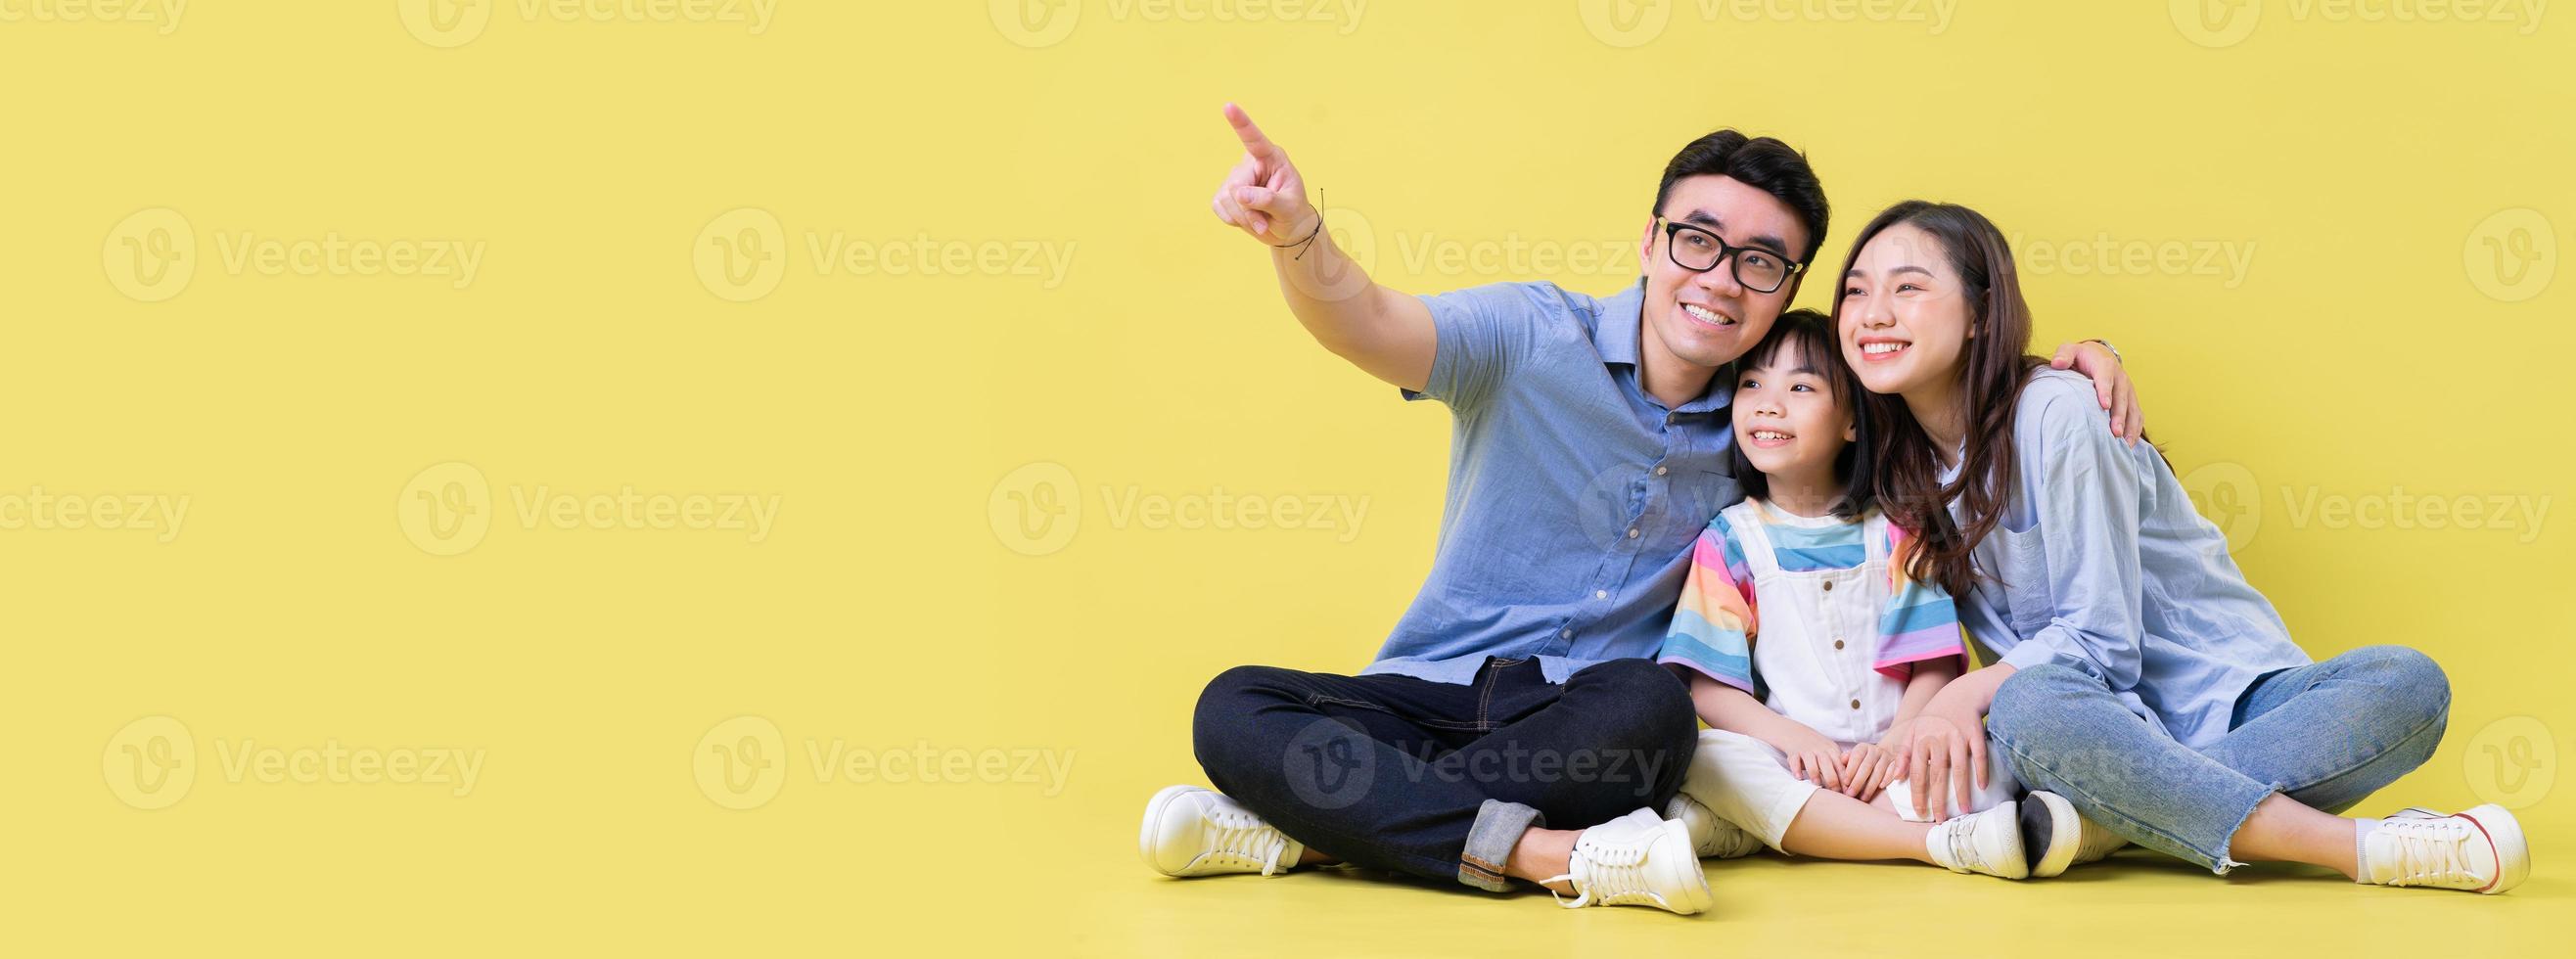 Portrait of young Asian family on background photo